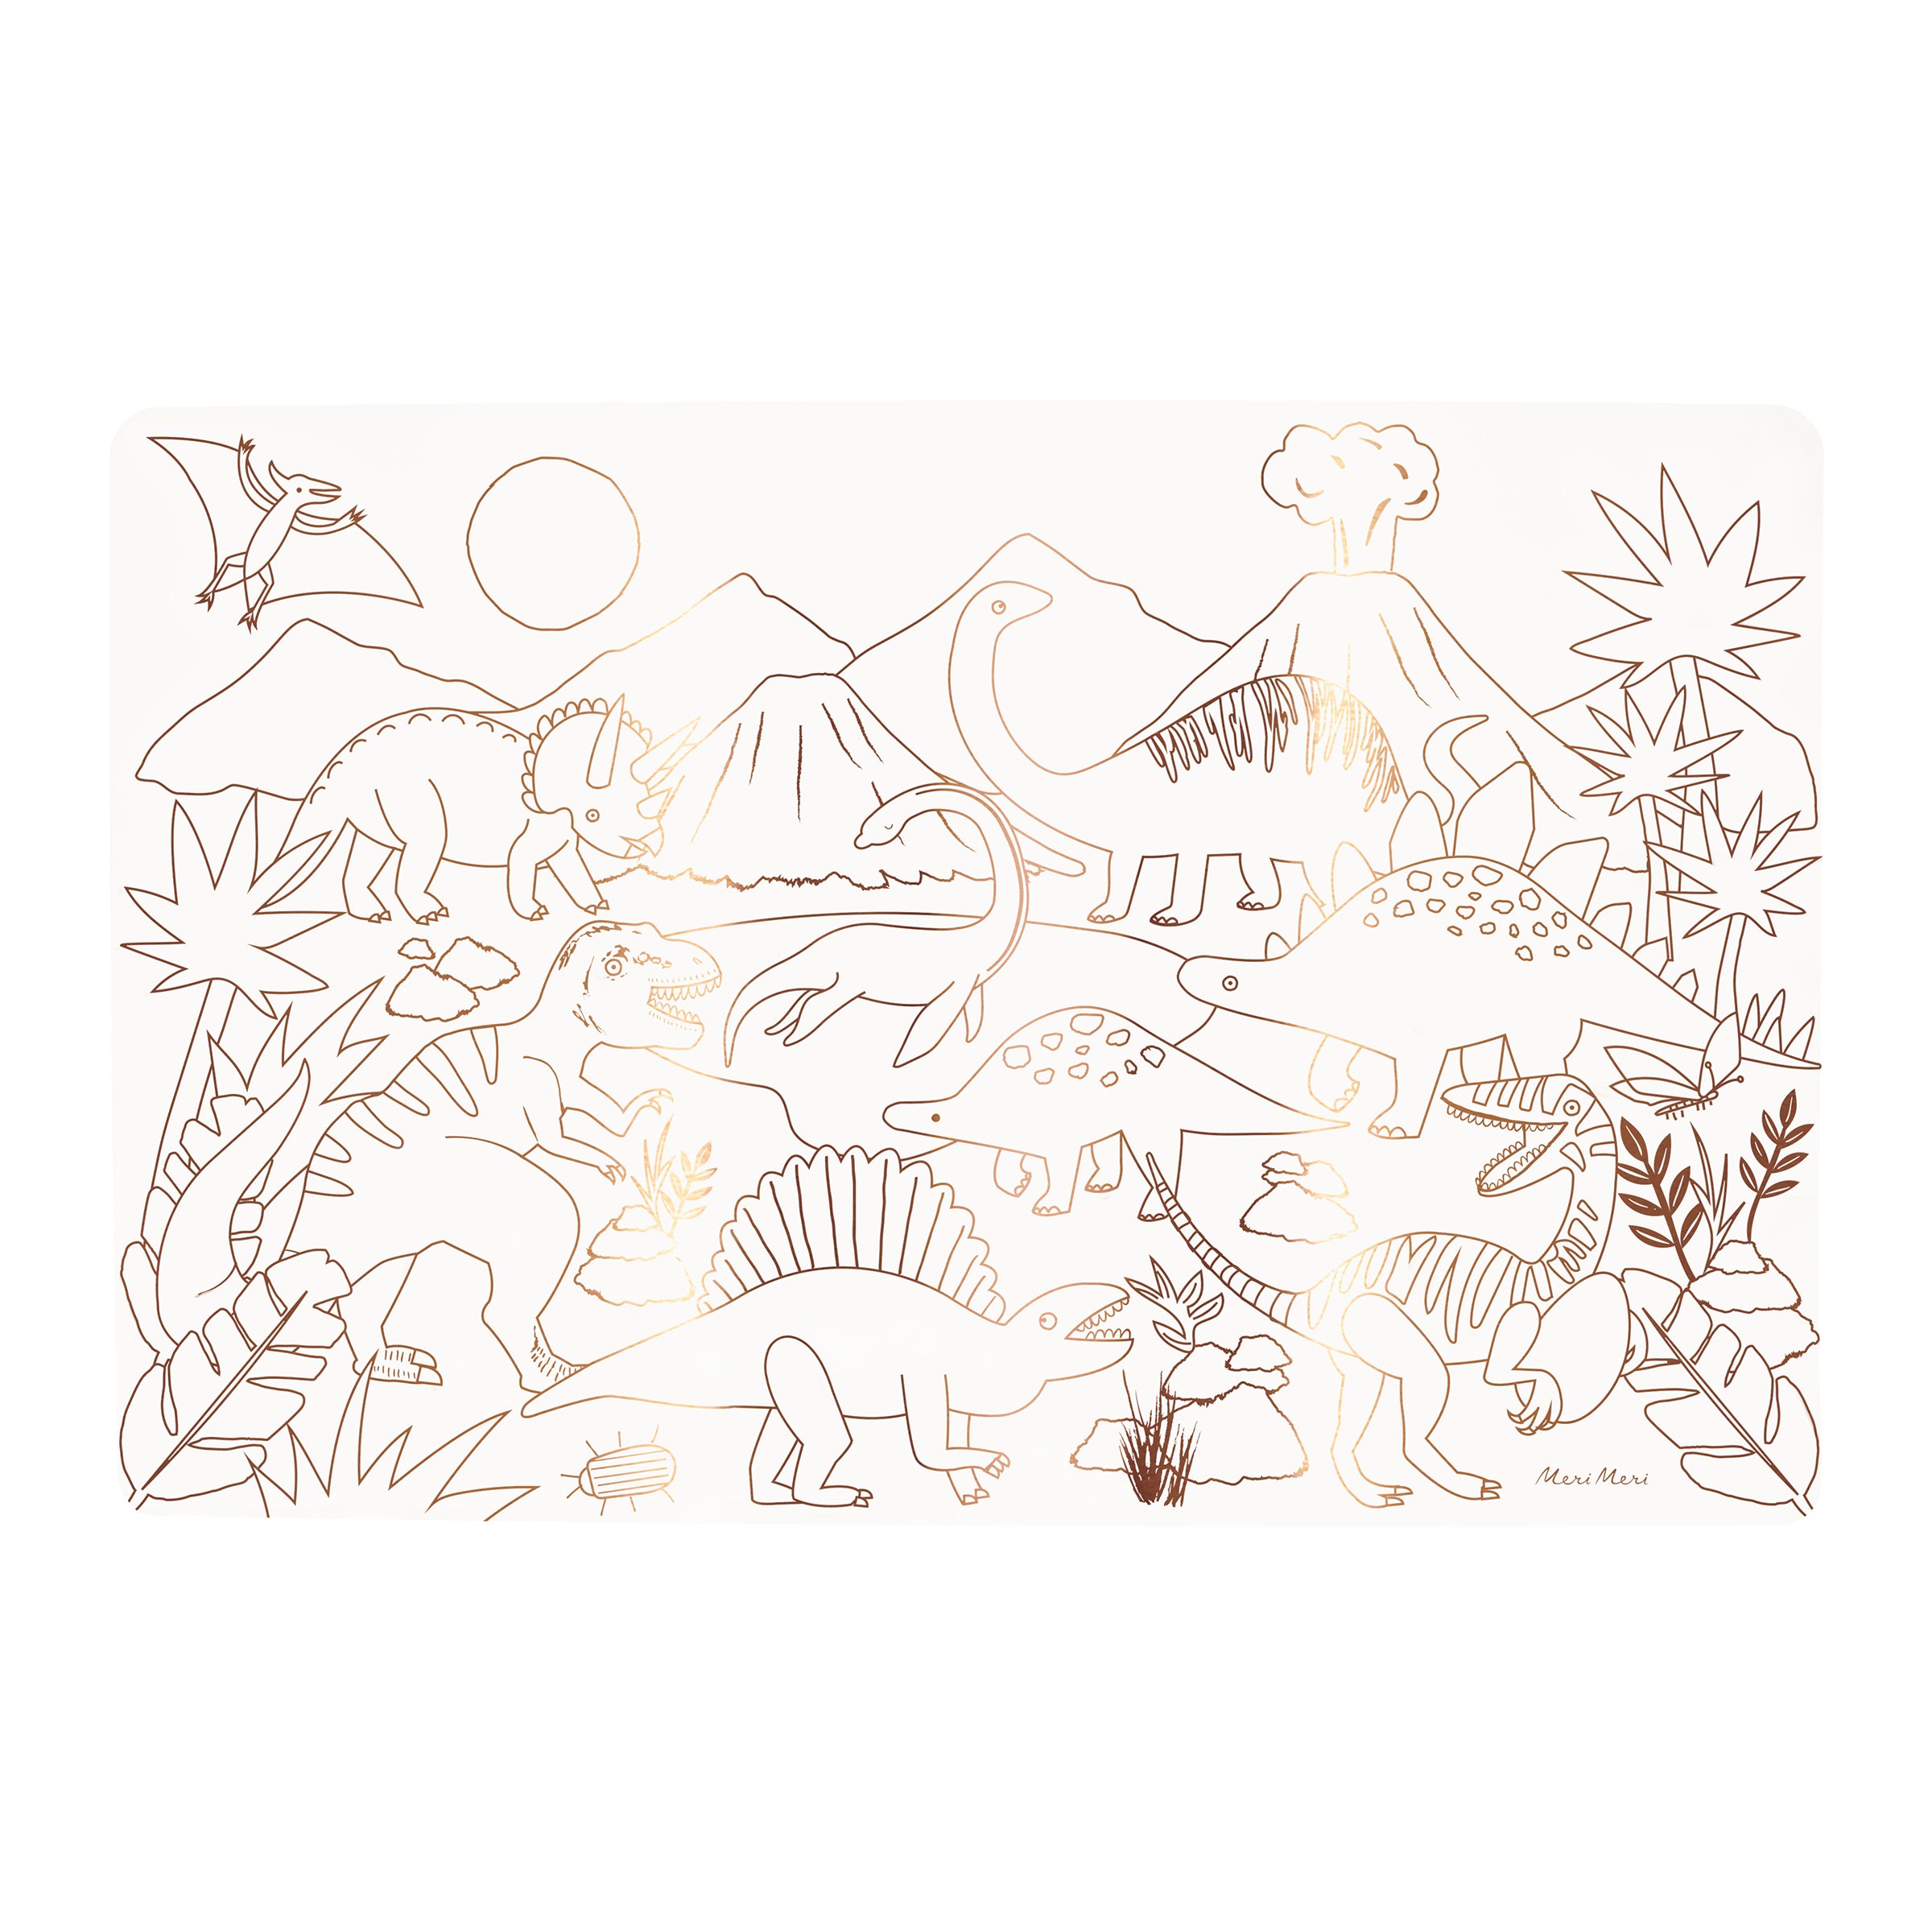 Colouring time is here, with out special kids placemats featuring dinosaurs, perfect for a dinosaur party.